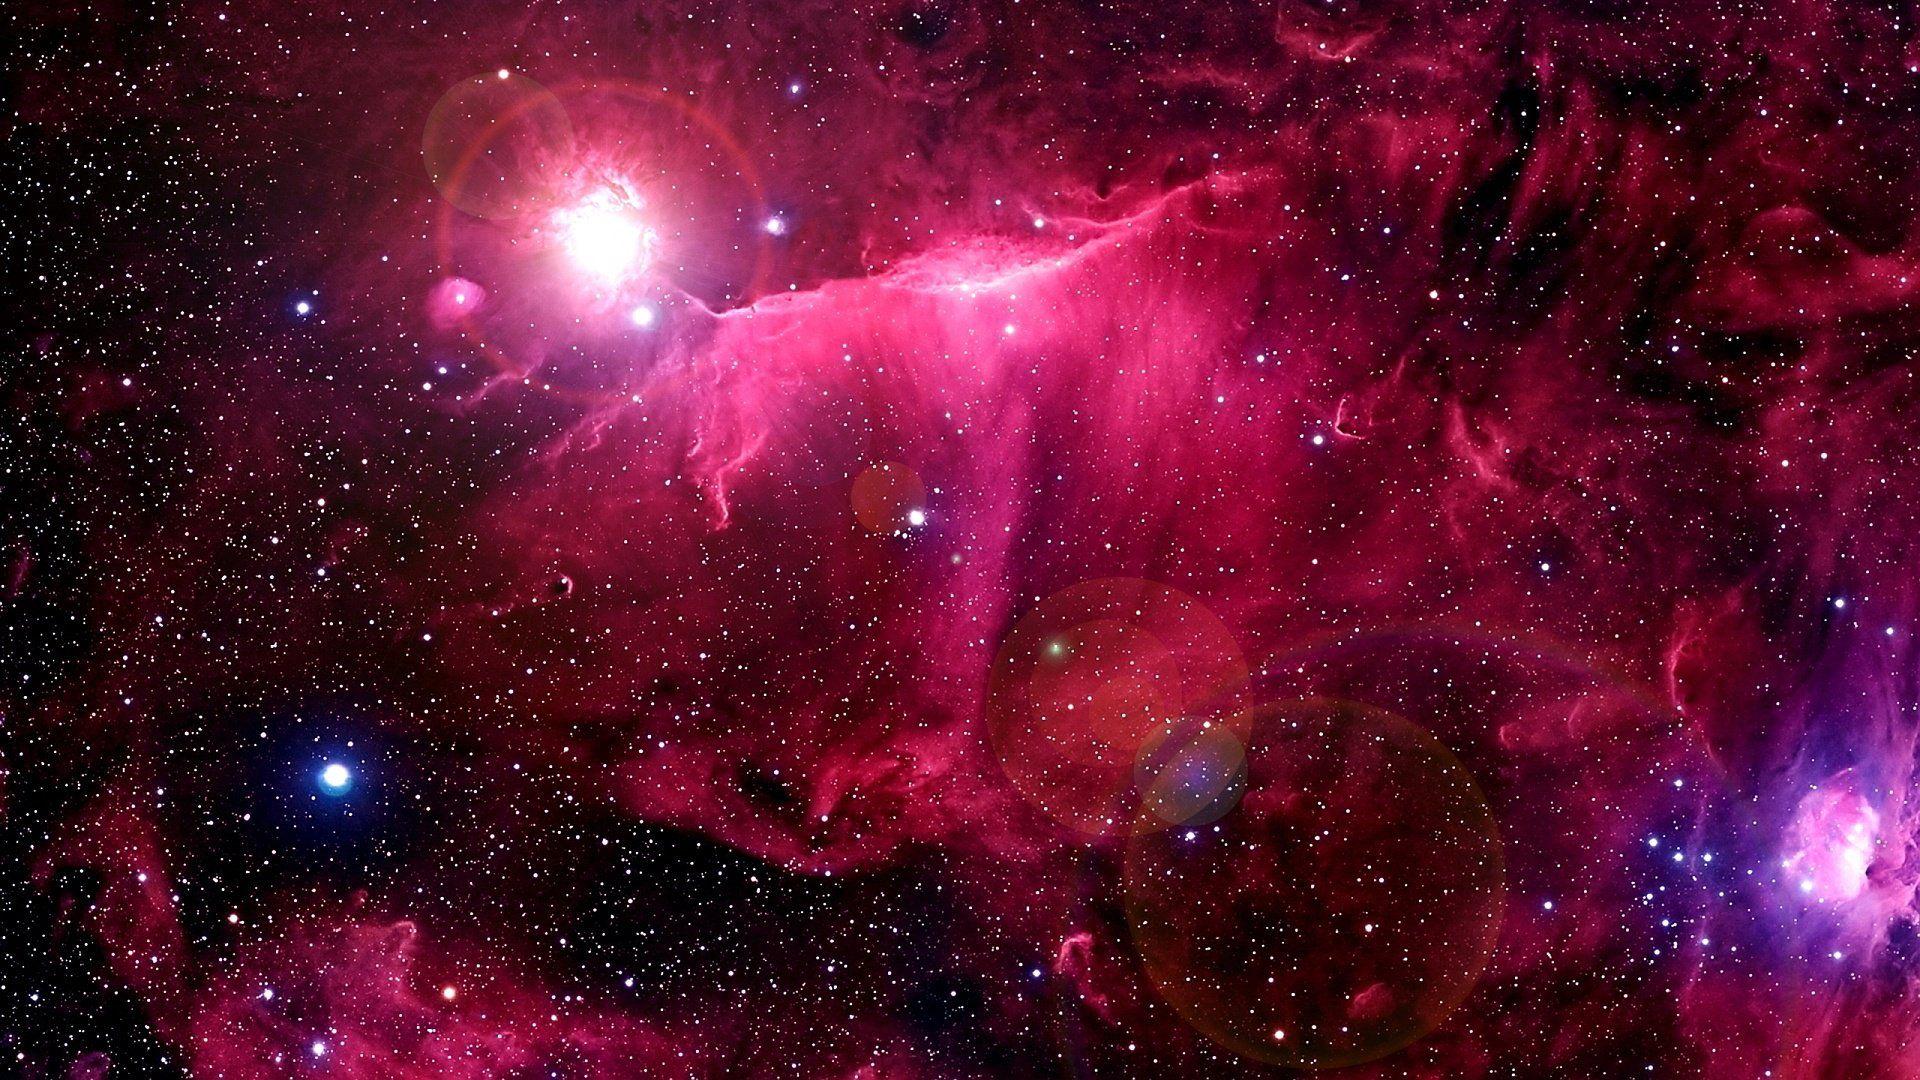 Red Space Wallpaper Hd For Mobile